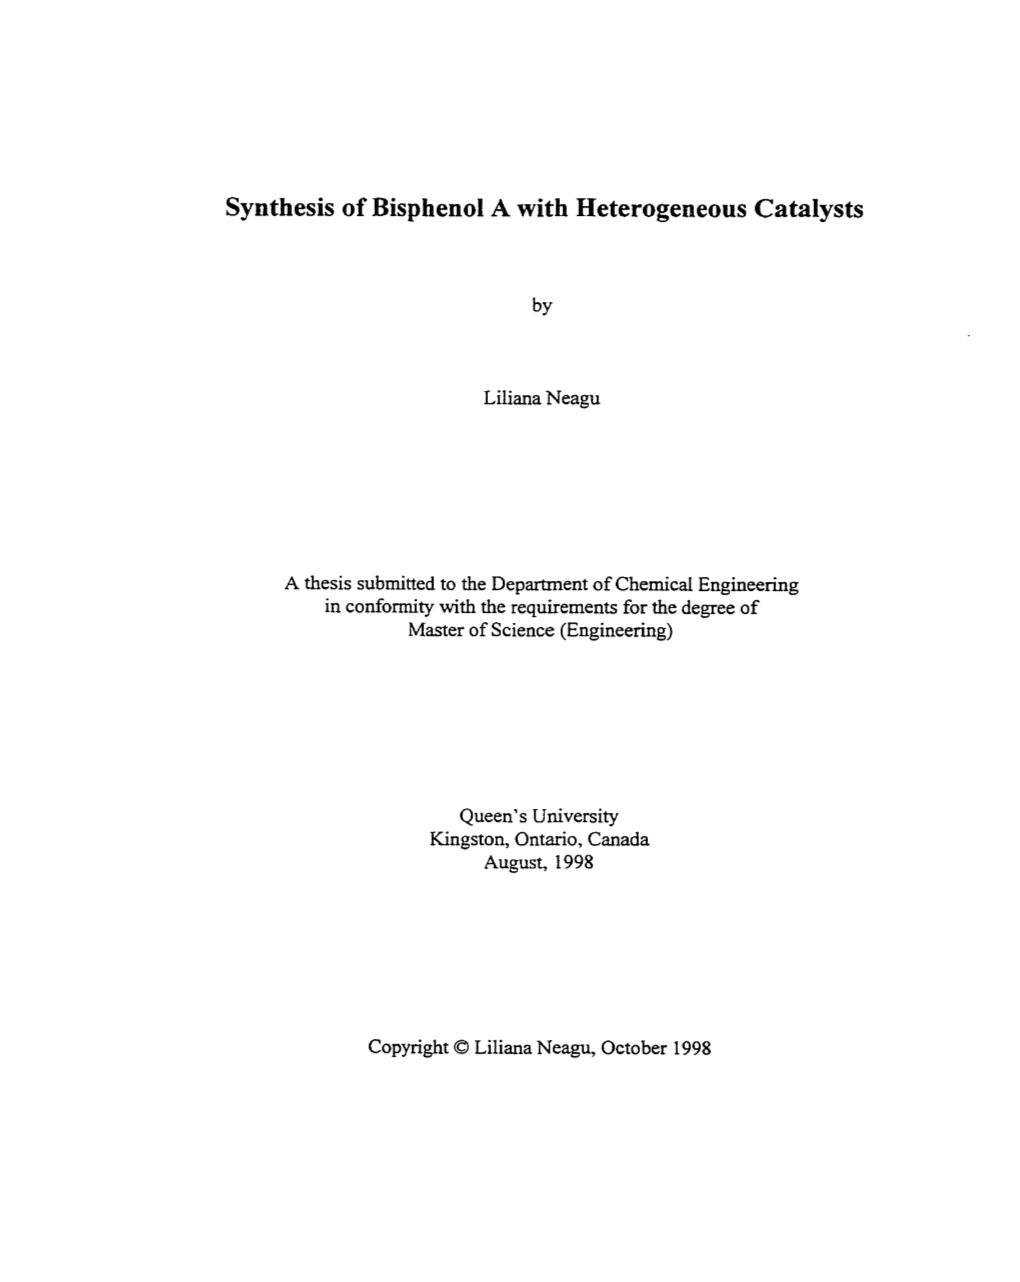 Synthesis of Bisphenol a with Heterogeneous Catalysts